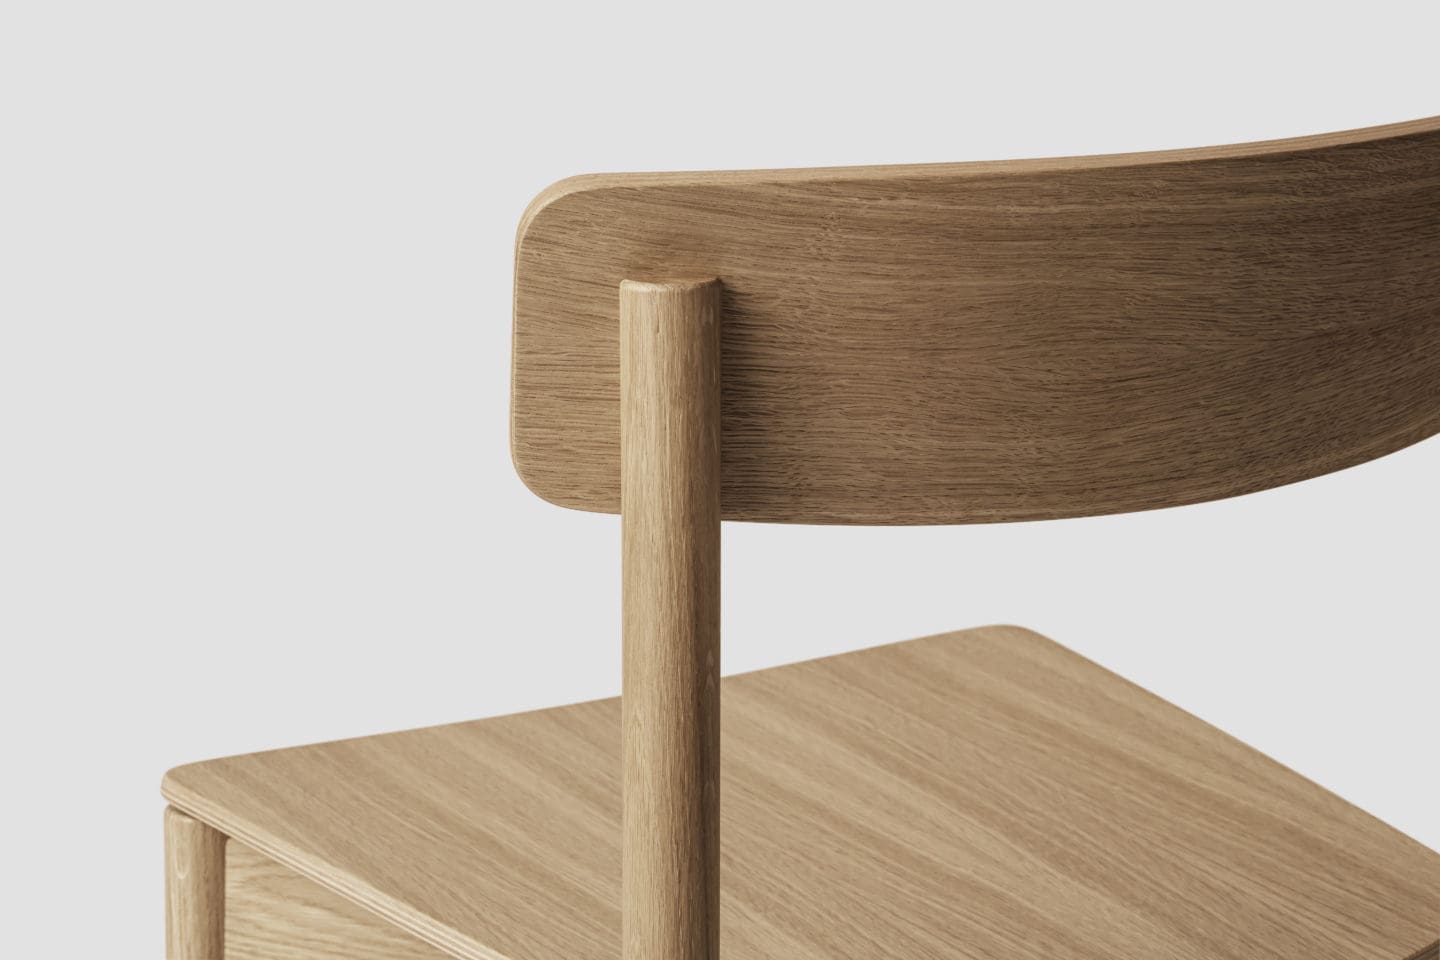 Oak and plywood form the Cross Chair